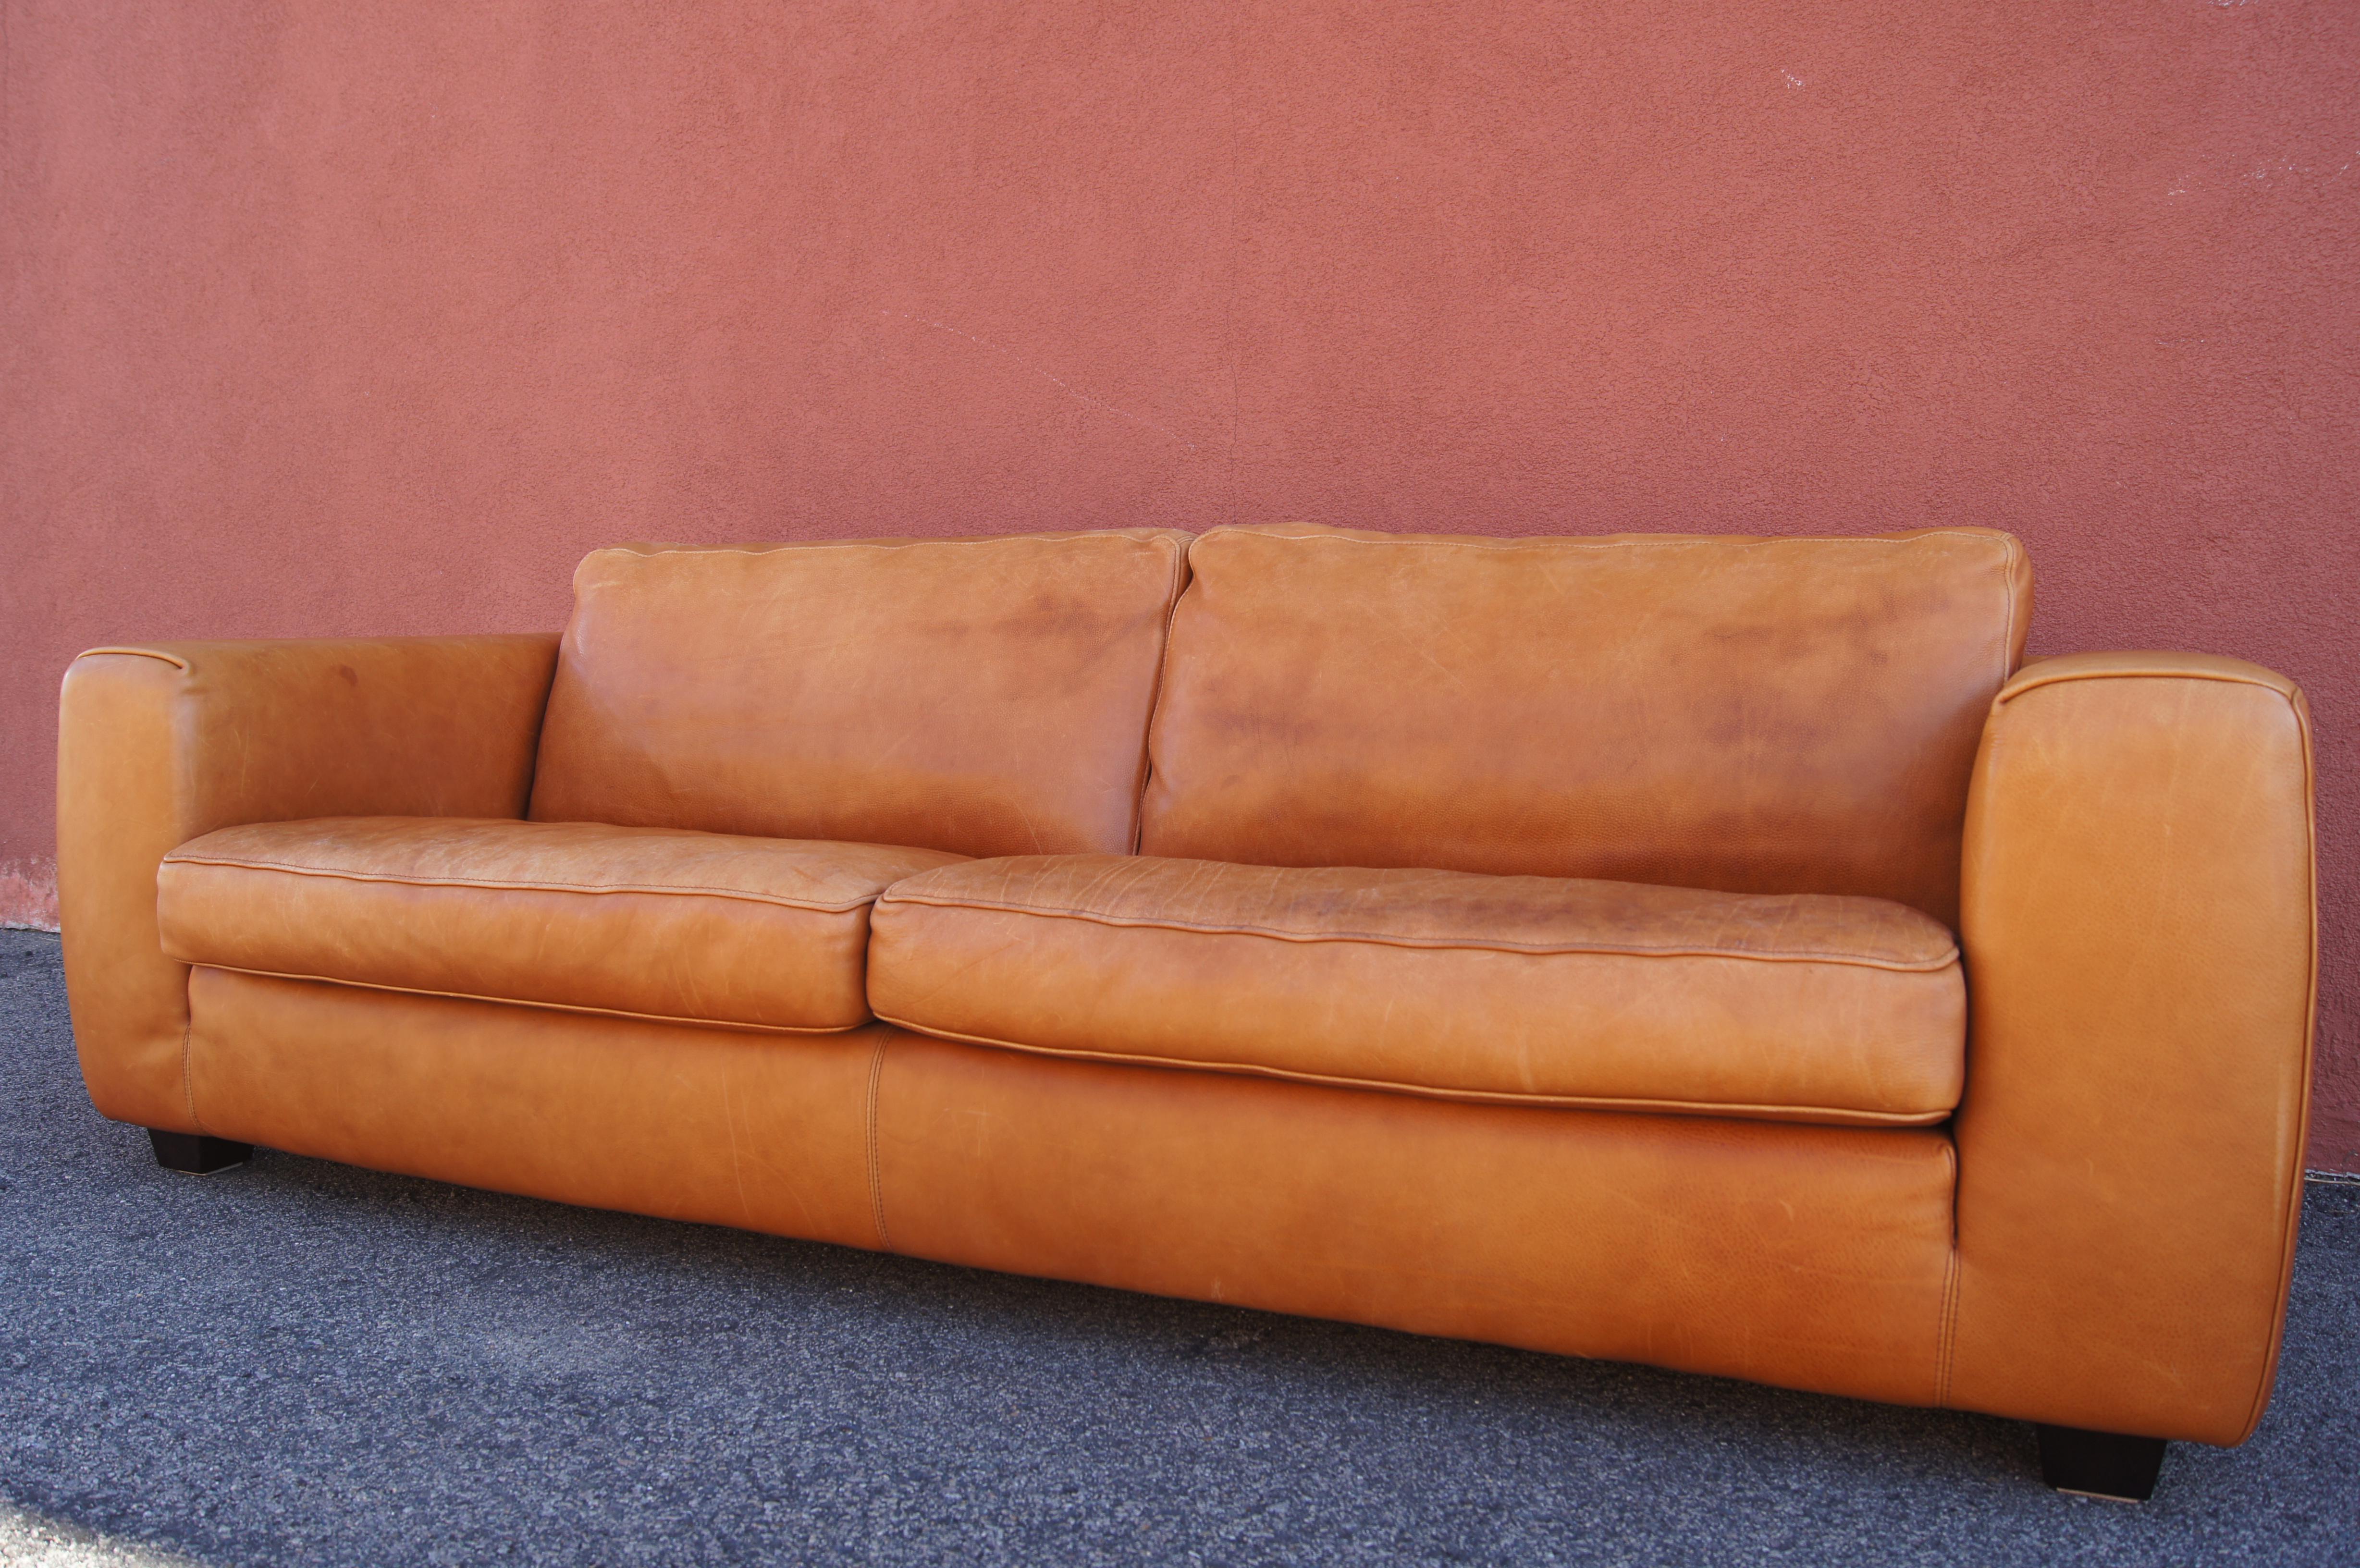 Designed for the Dutch furniture company Linteloo Lab, the Senza Tempo M Sofa is, as its name declares, timeless. The deeply comfortable two-seater, upholstered in a warm brown leather with wide armrests and blocky wooden feet, would complement both